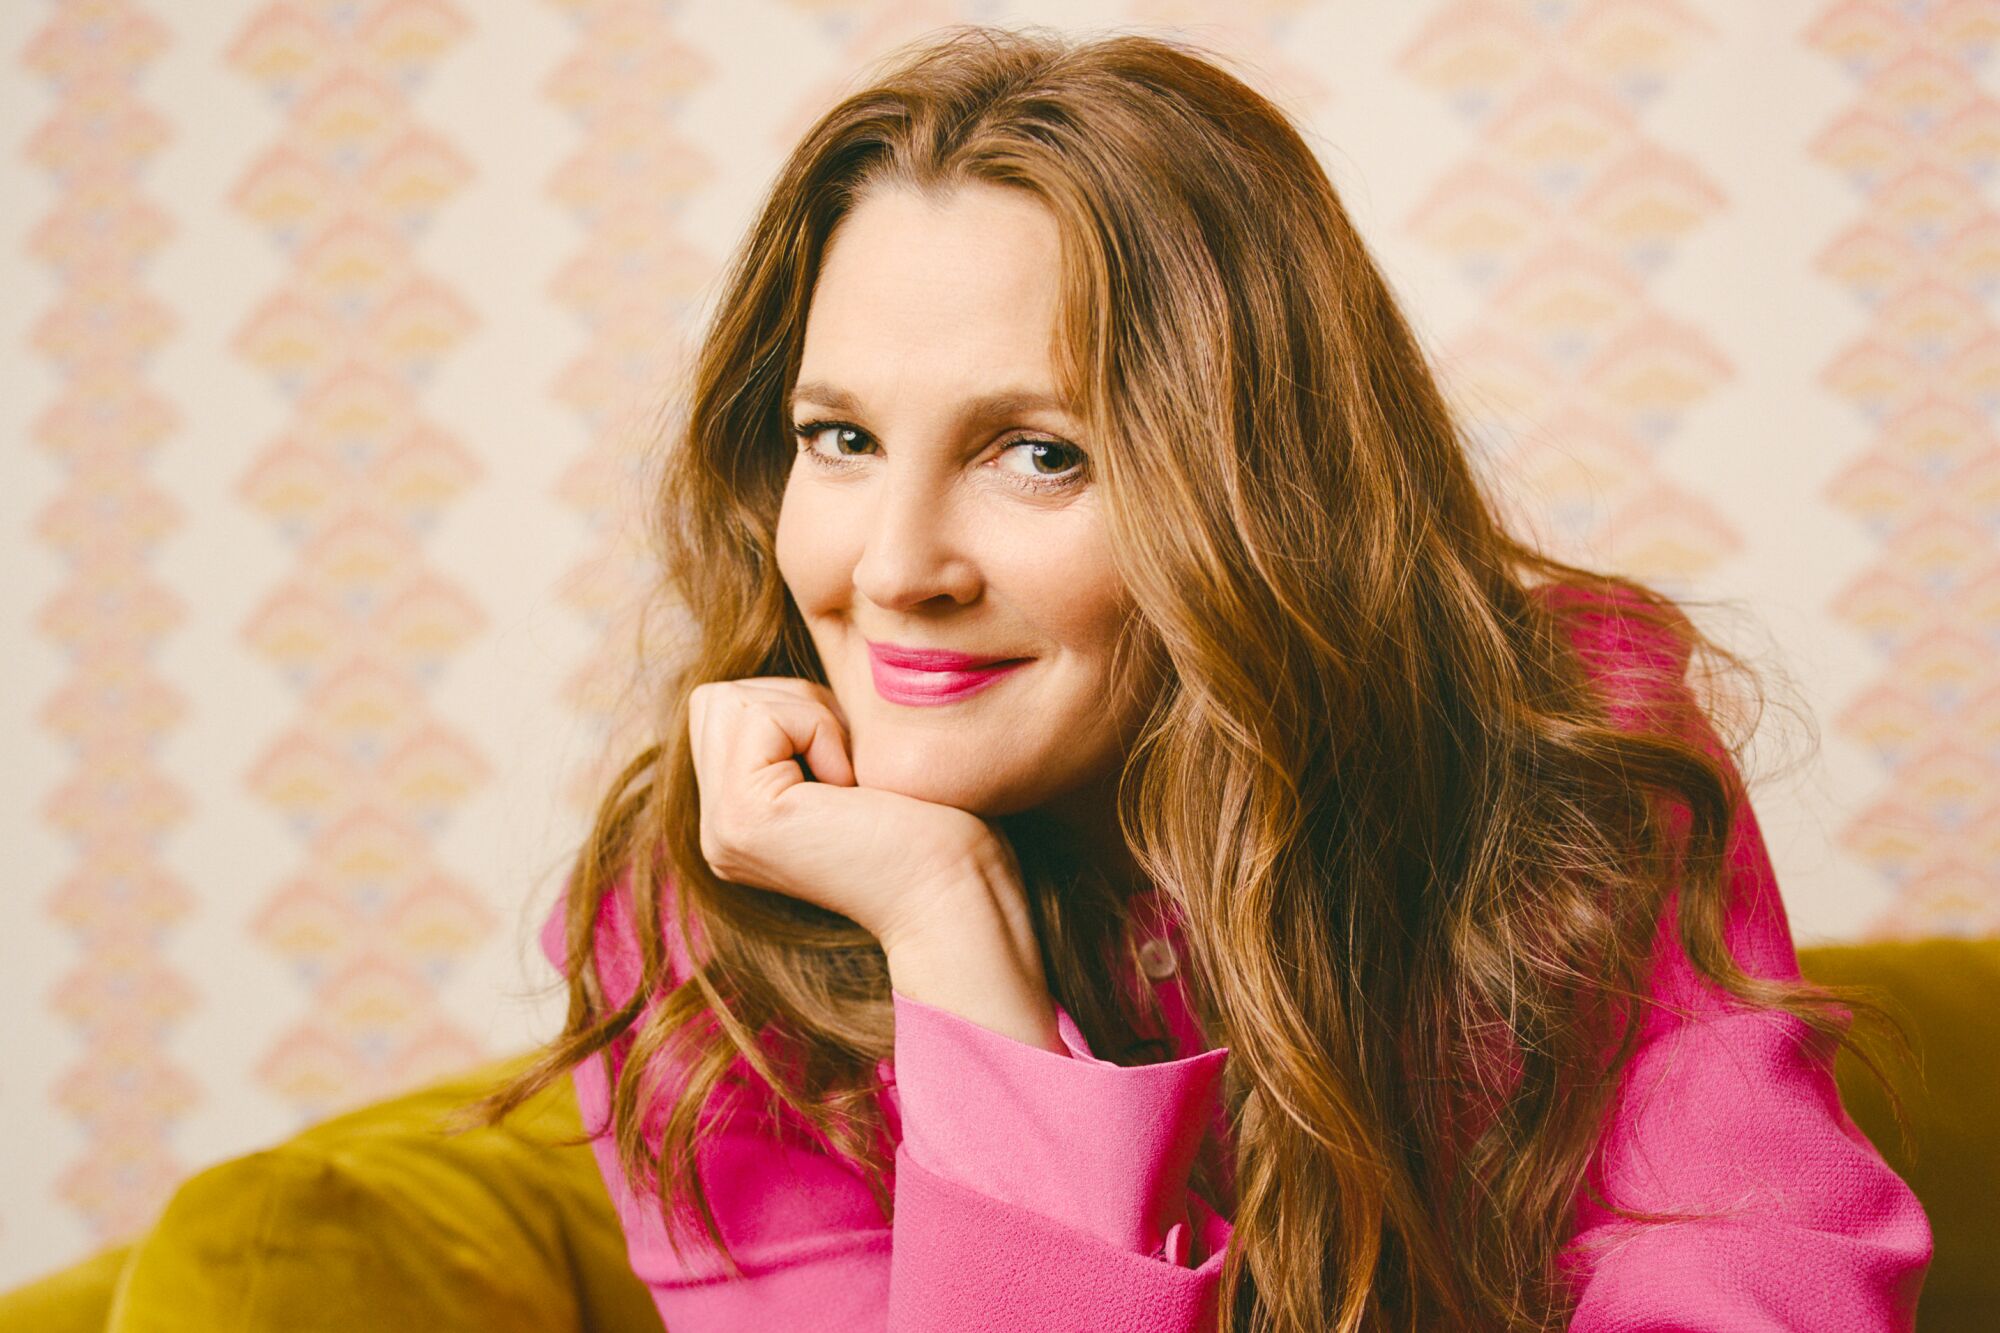 Drew Barrymore, wearing a pink shirt, poses with her hand under her chin.